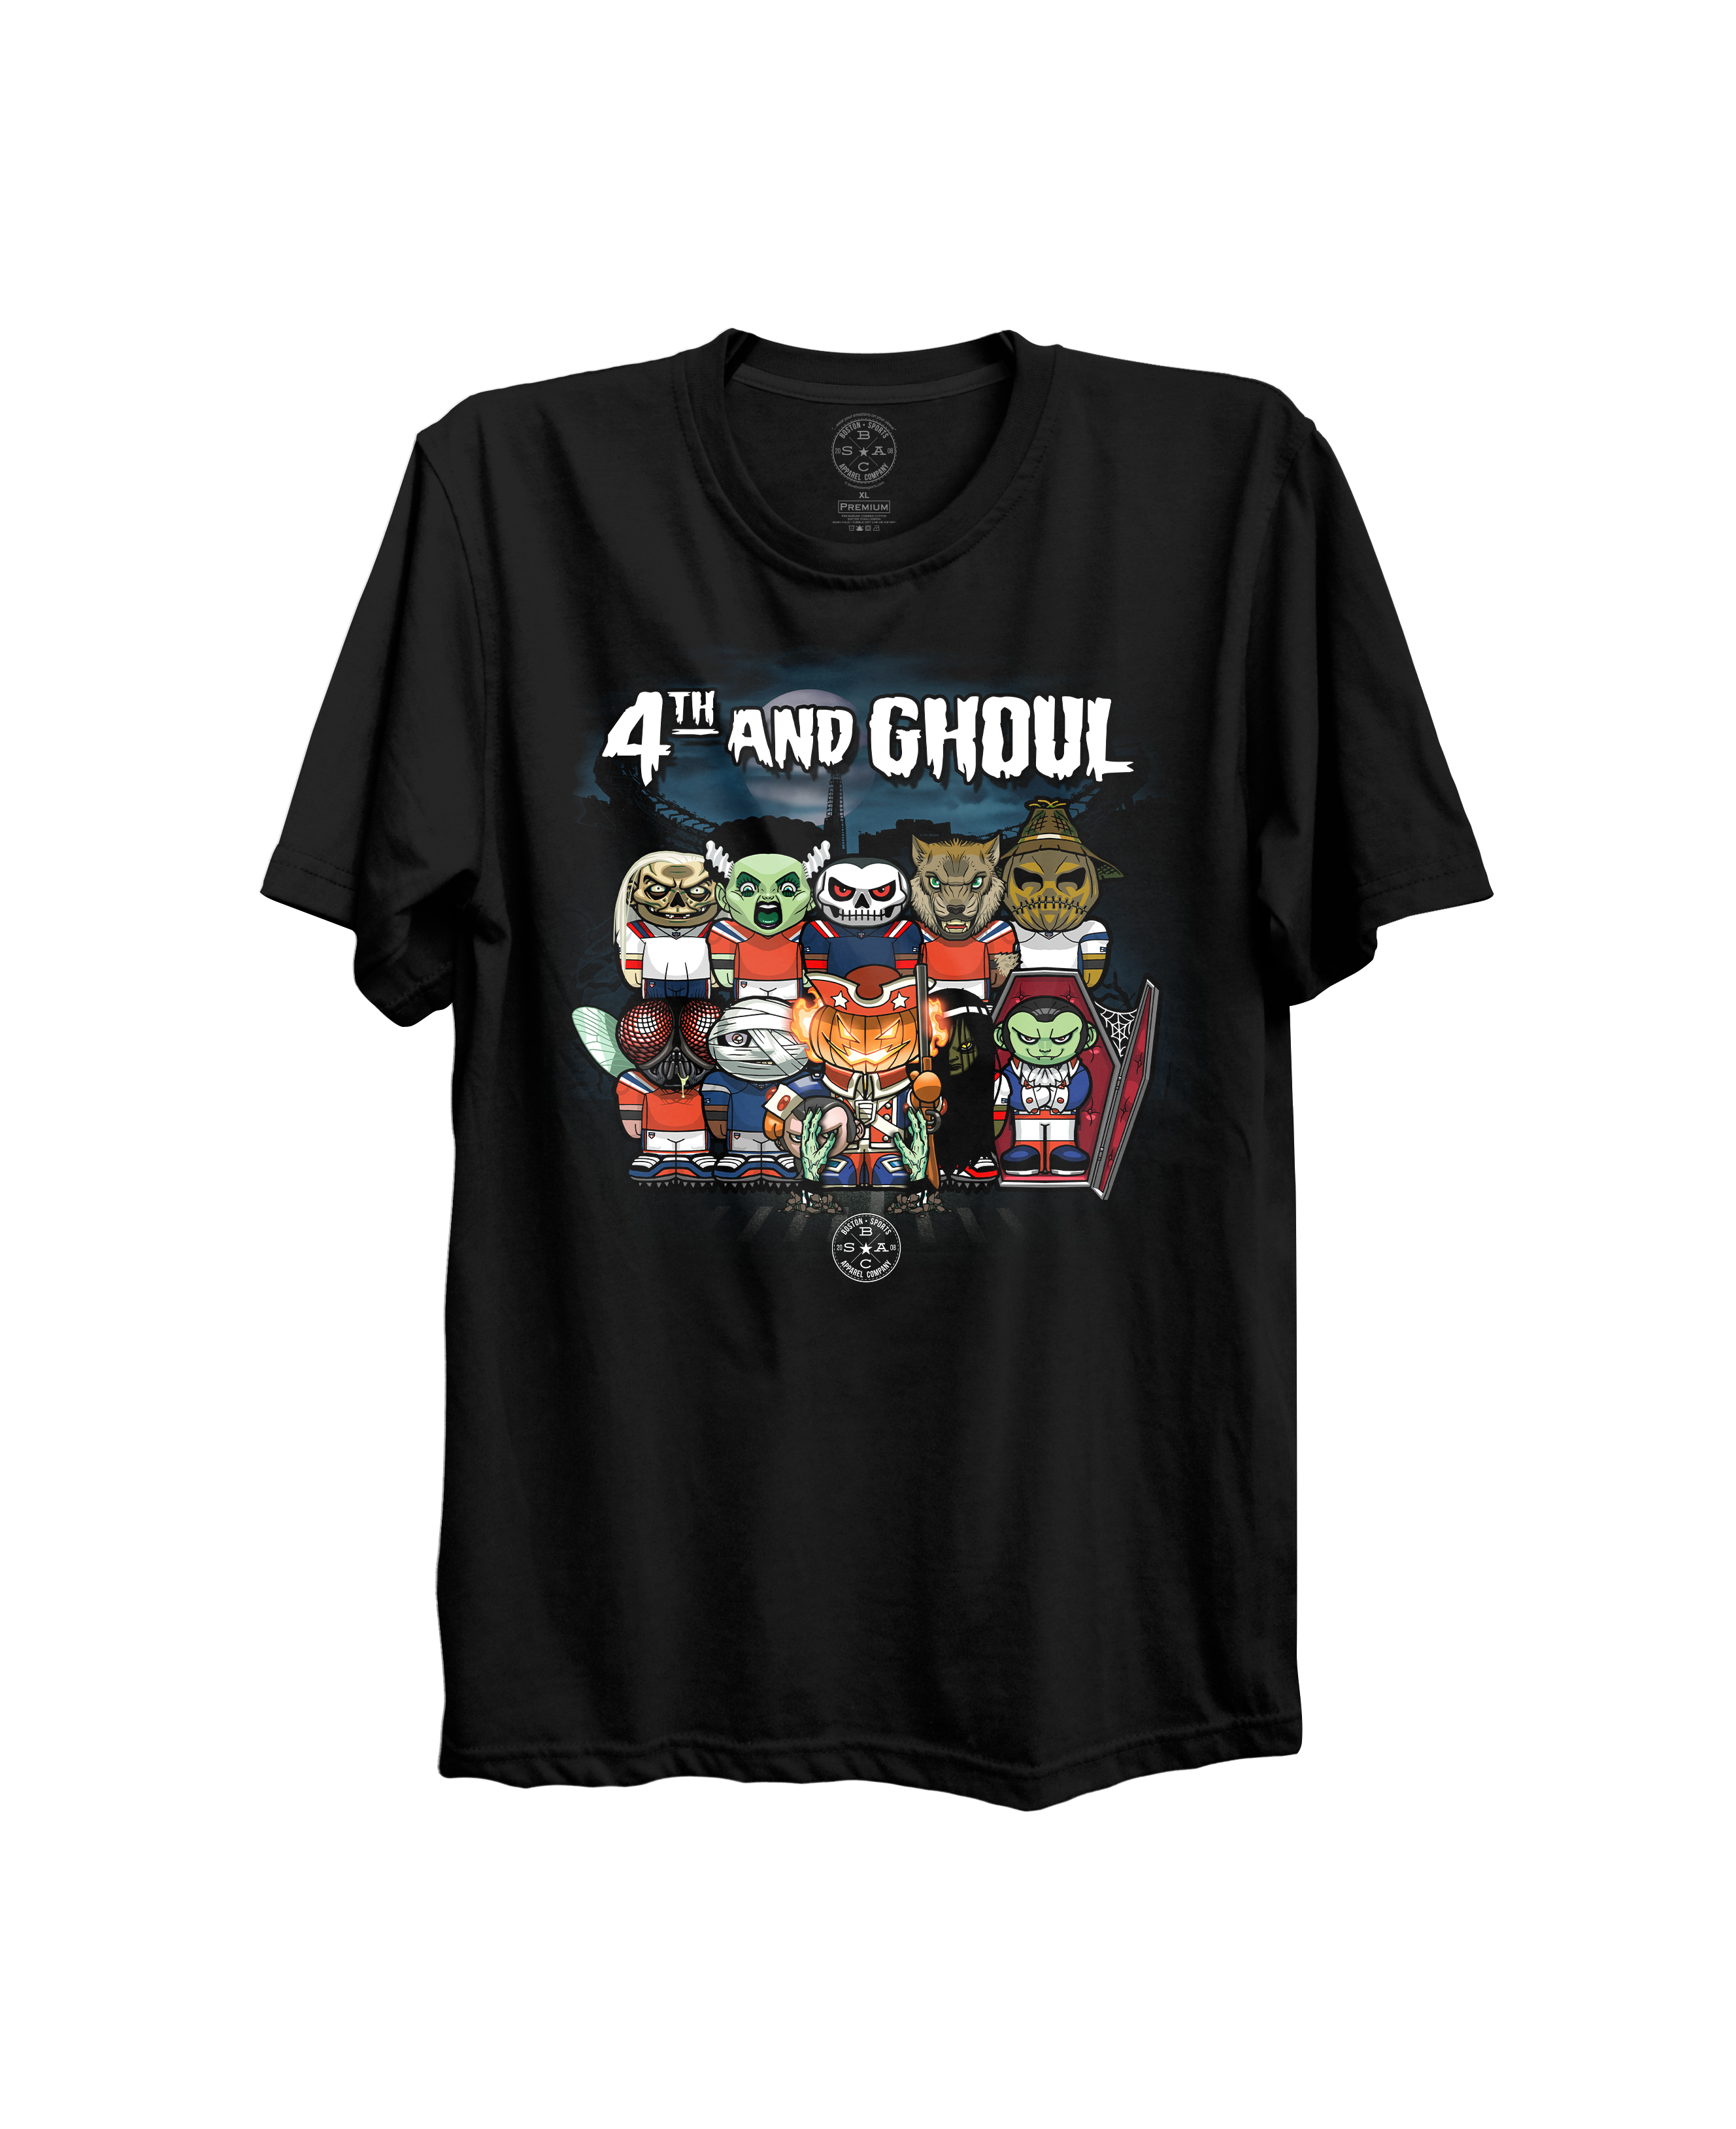 4th And Ghoul T-Shirt